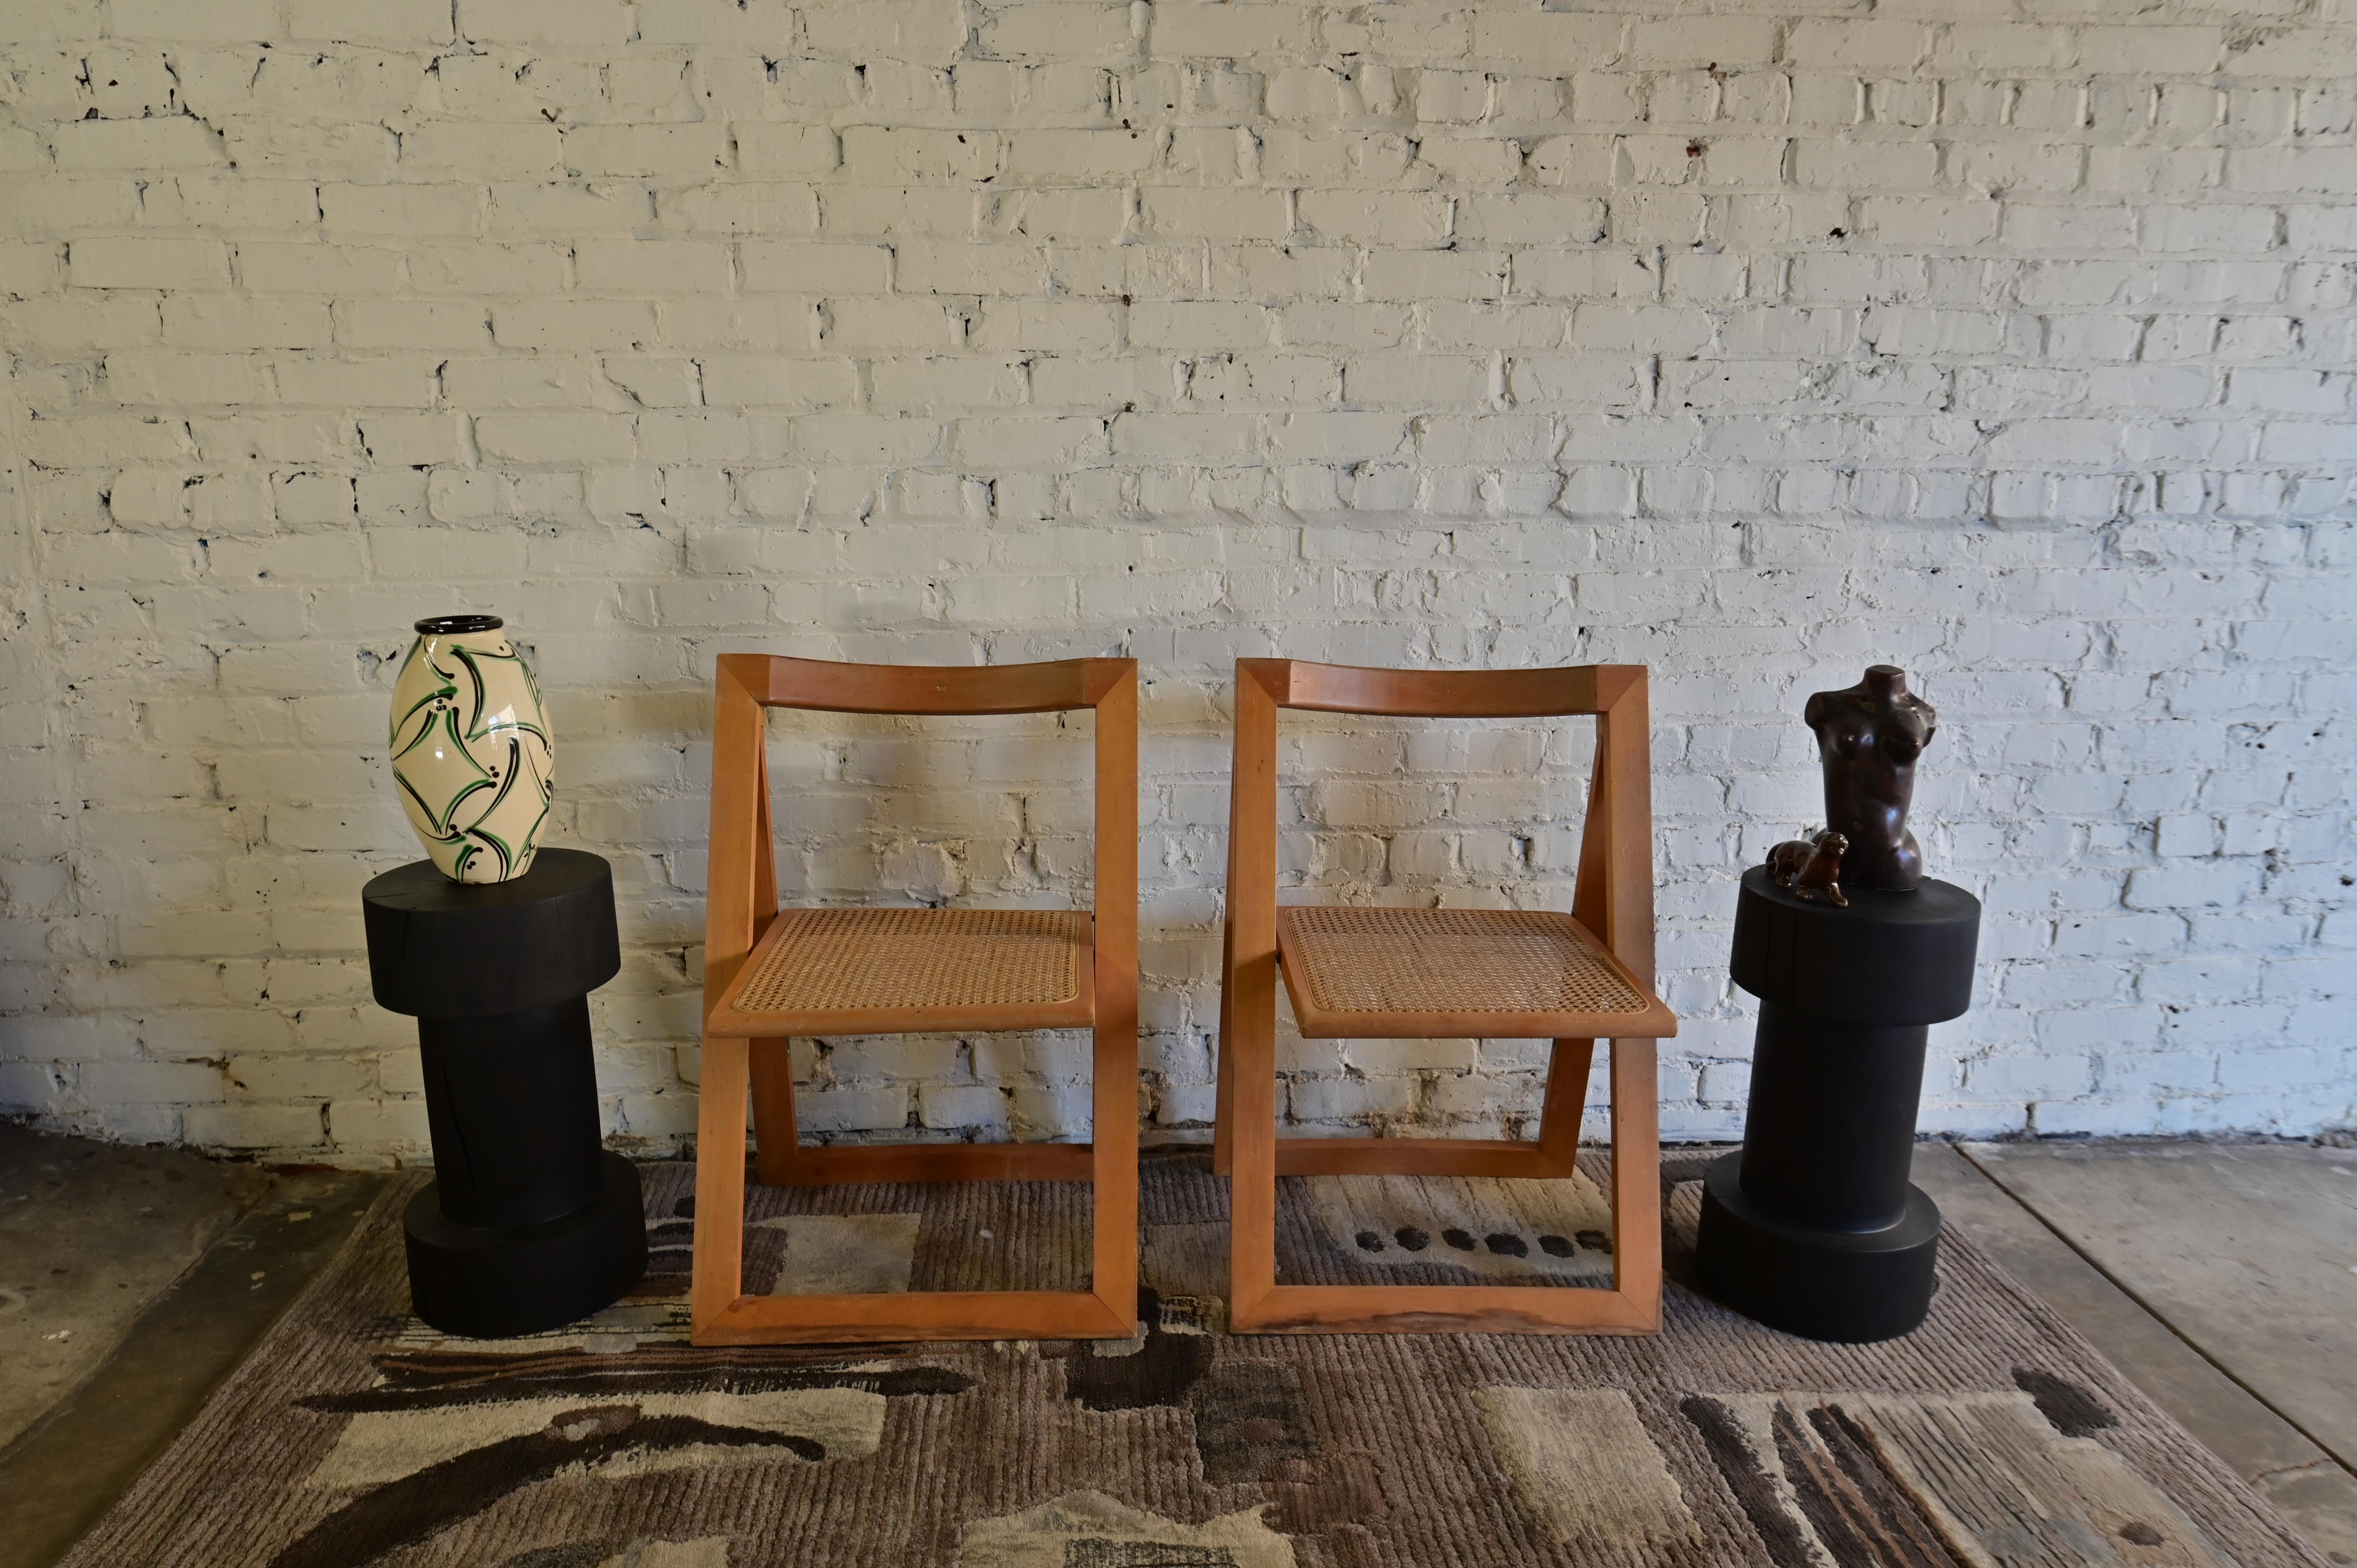 Pair of solid cherry wood end tables/stools, dyed black and finished with a durable wax finish. These minimal pieces function perfectly as either tables or stools, and are versatile enough to compliment any interior. Very solid and sturdy. Has a